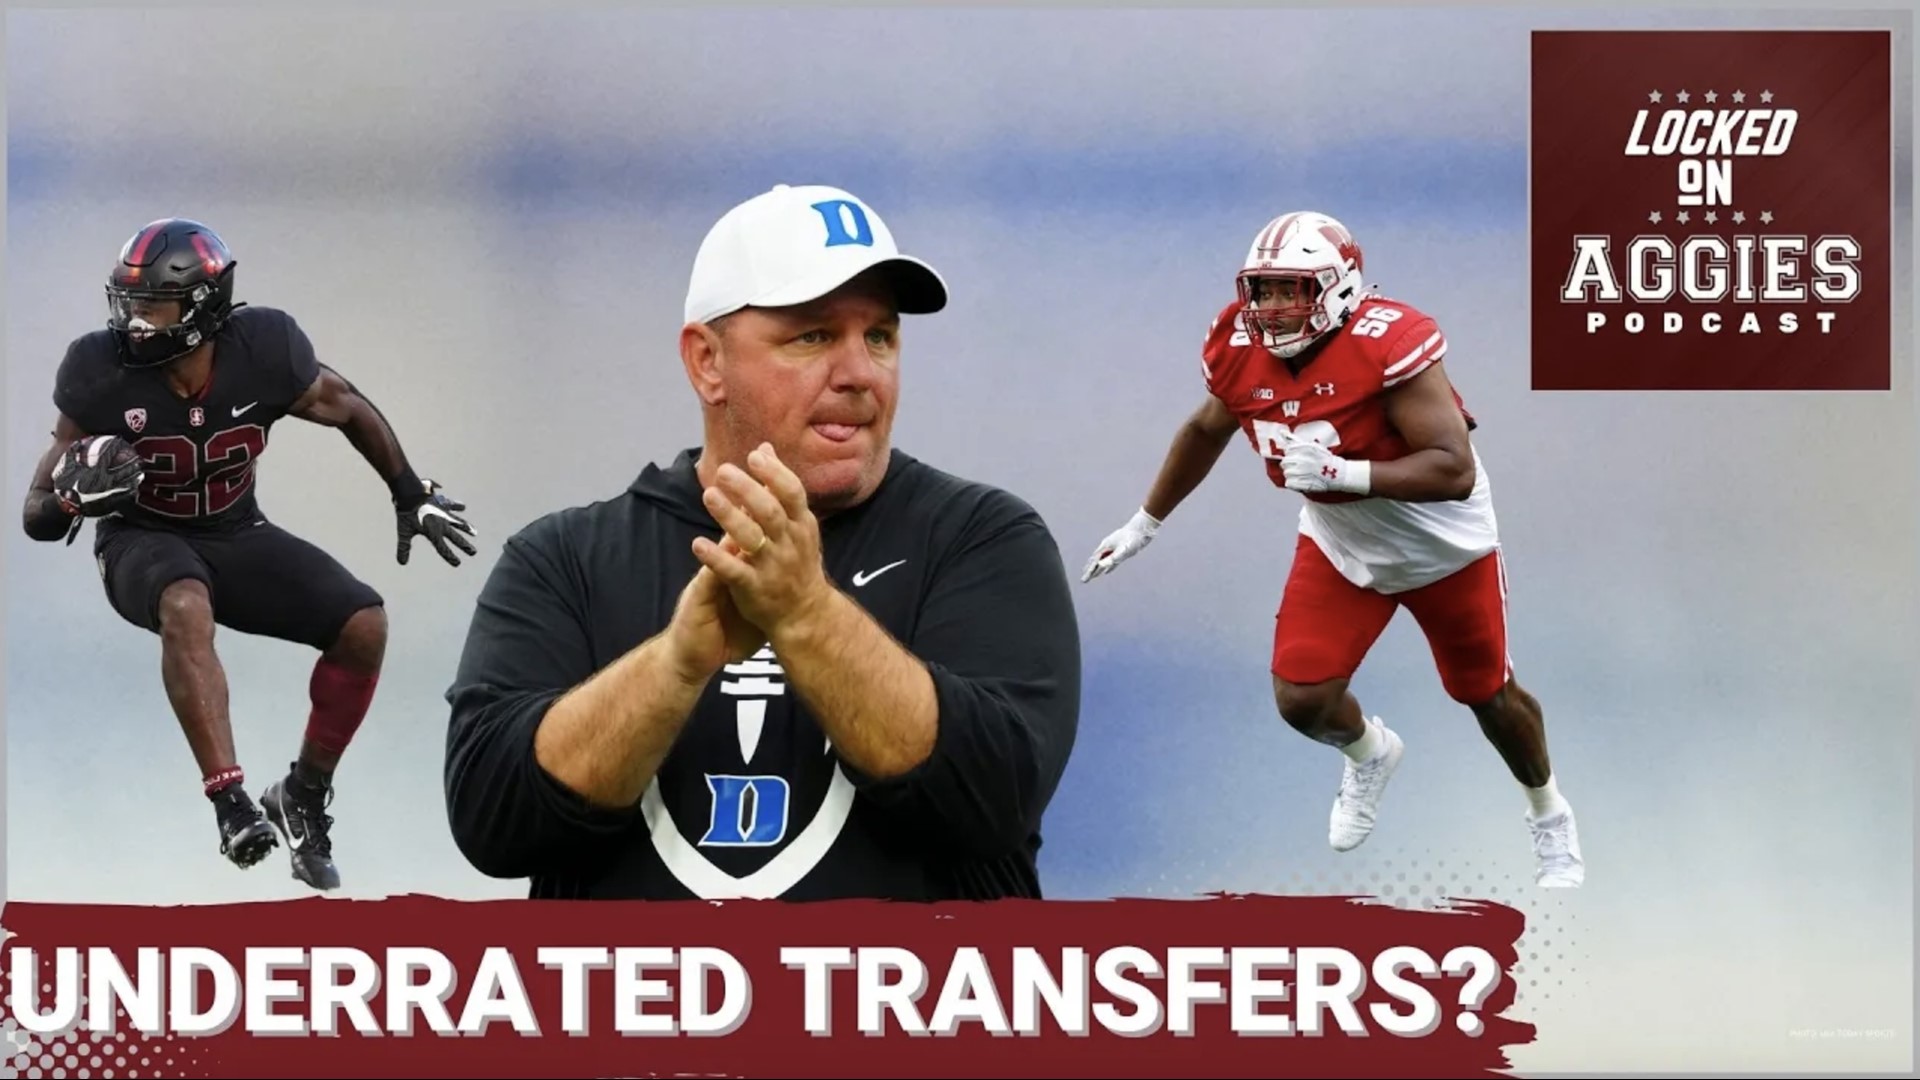 On today's episode of Locked On Aggies host Andrew Stefaniak talks about some of Texas A&M's transfer portal additions who are underrated